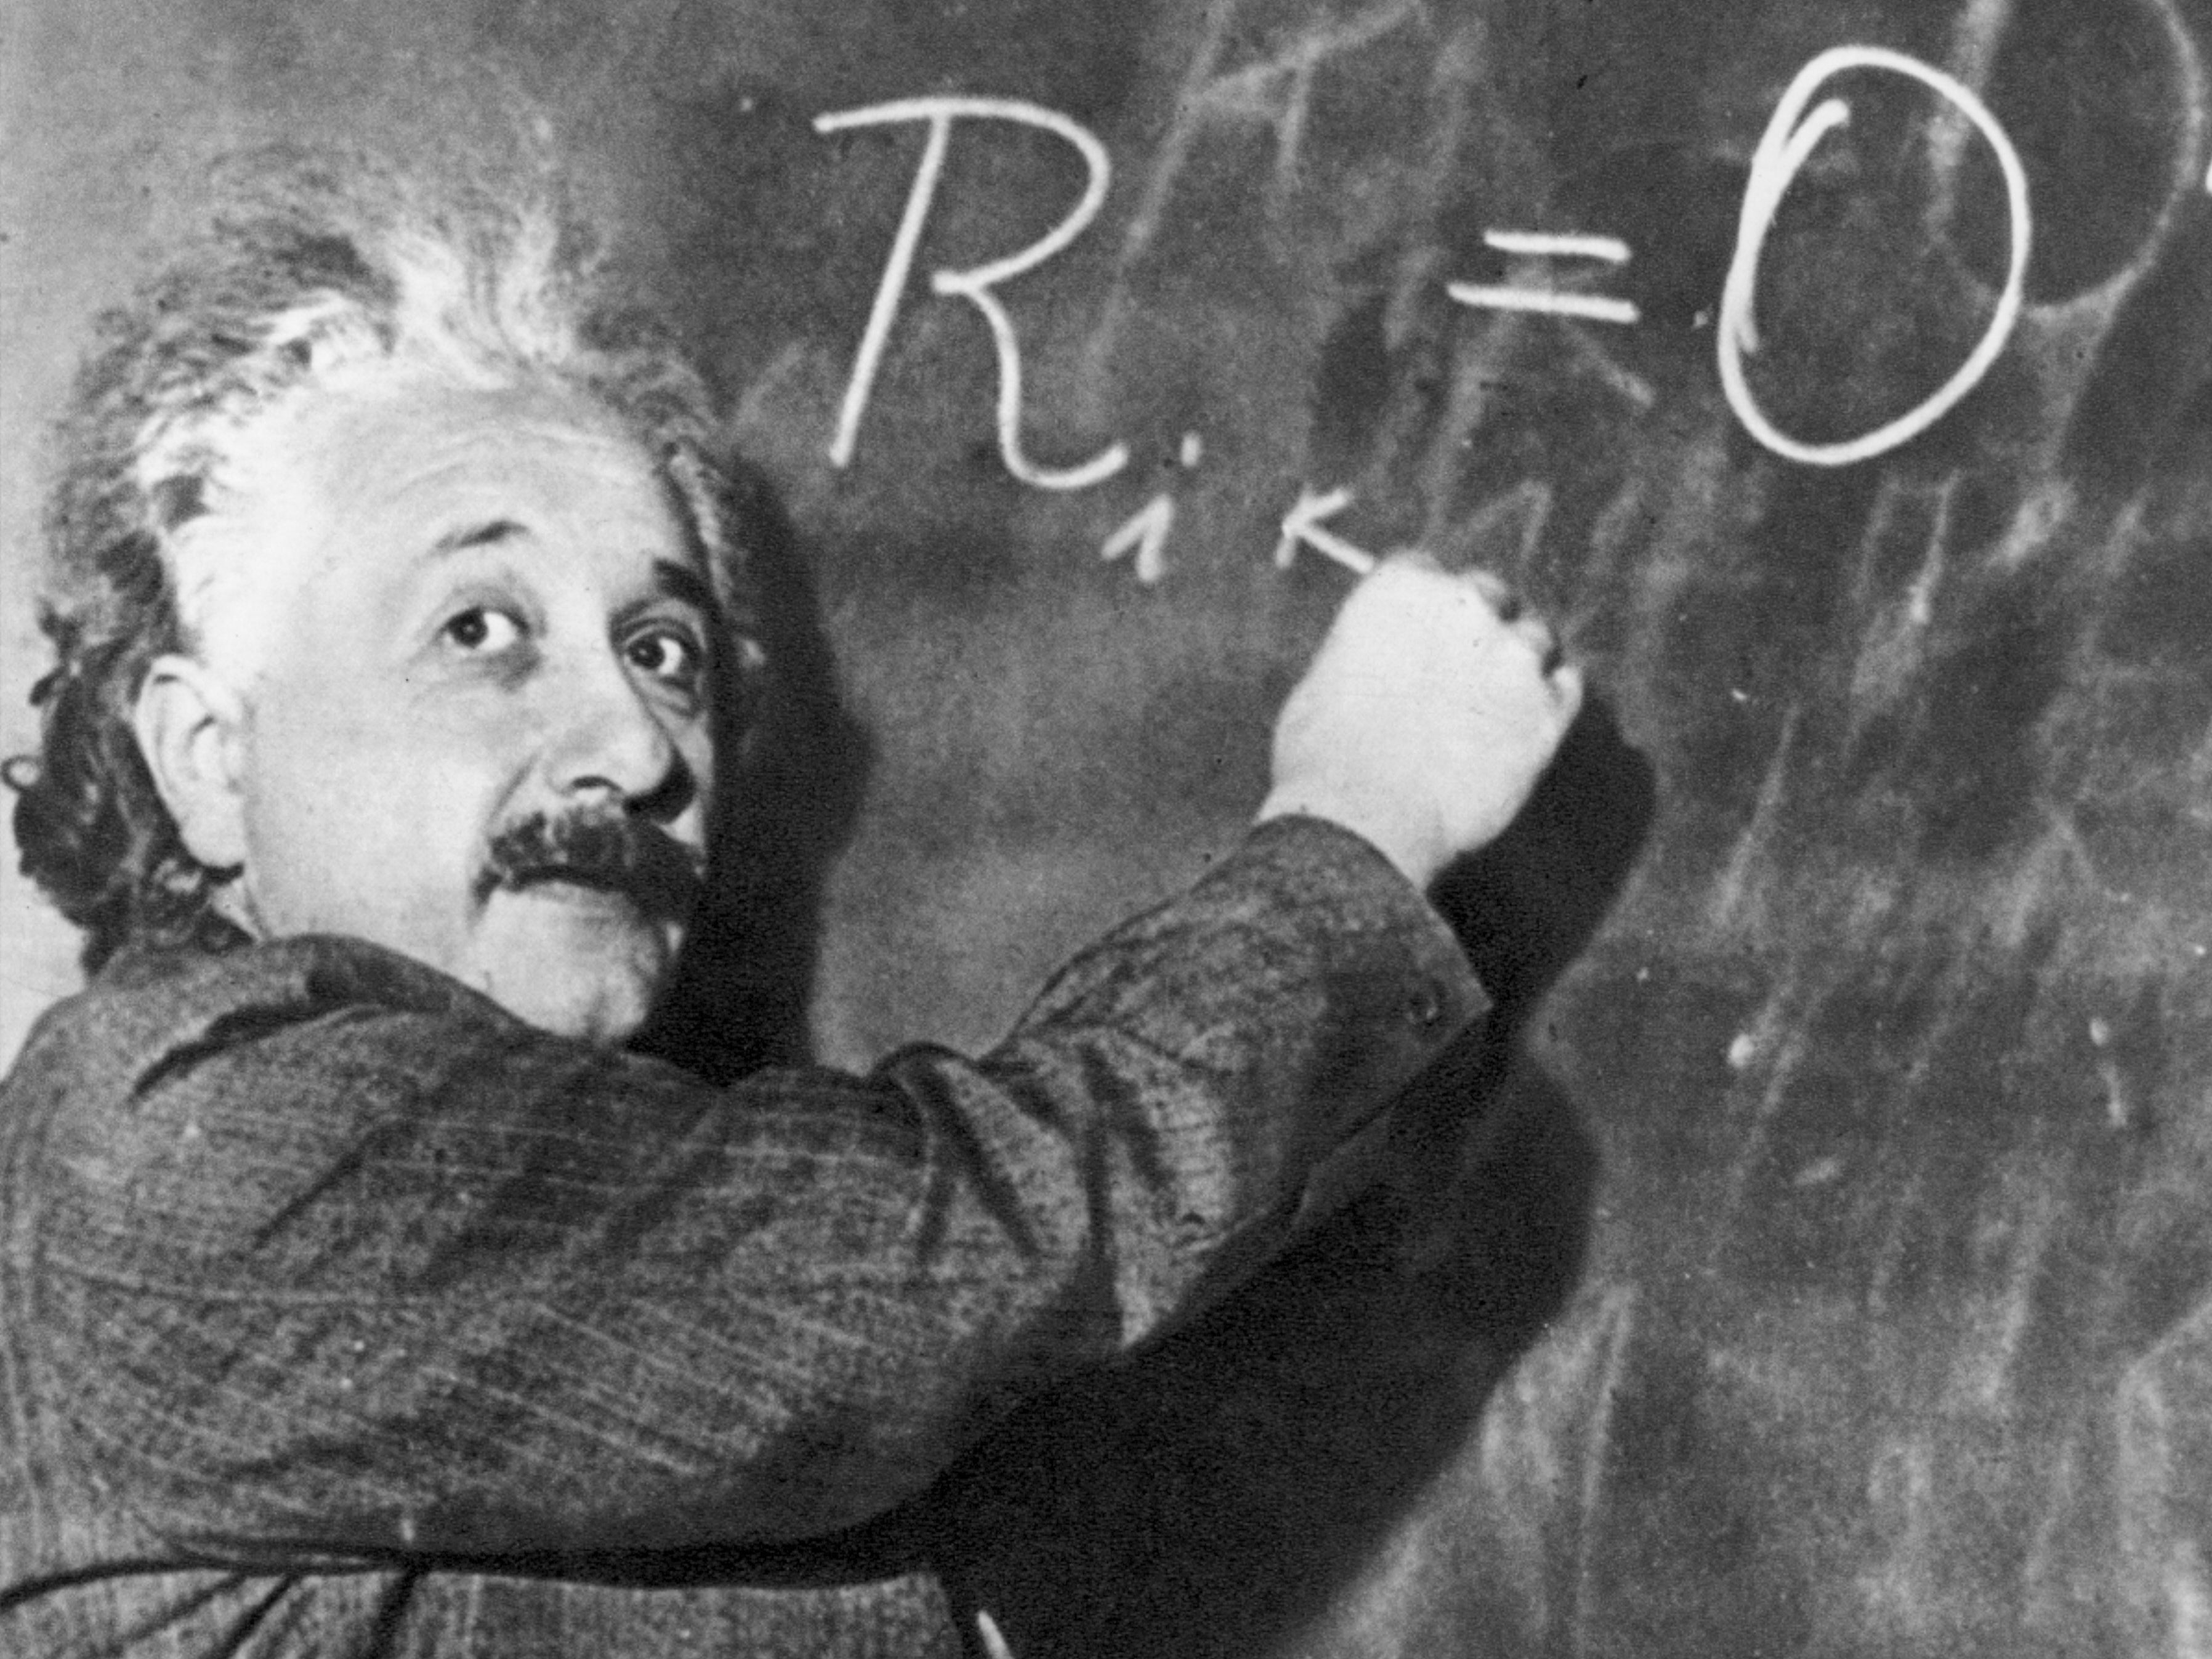 Out of the equation: Einstein’s theory of relativity changed the way we see the universe